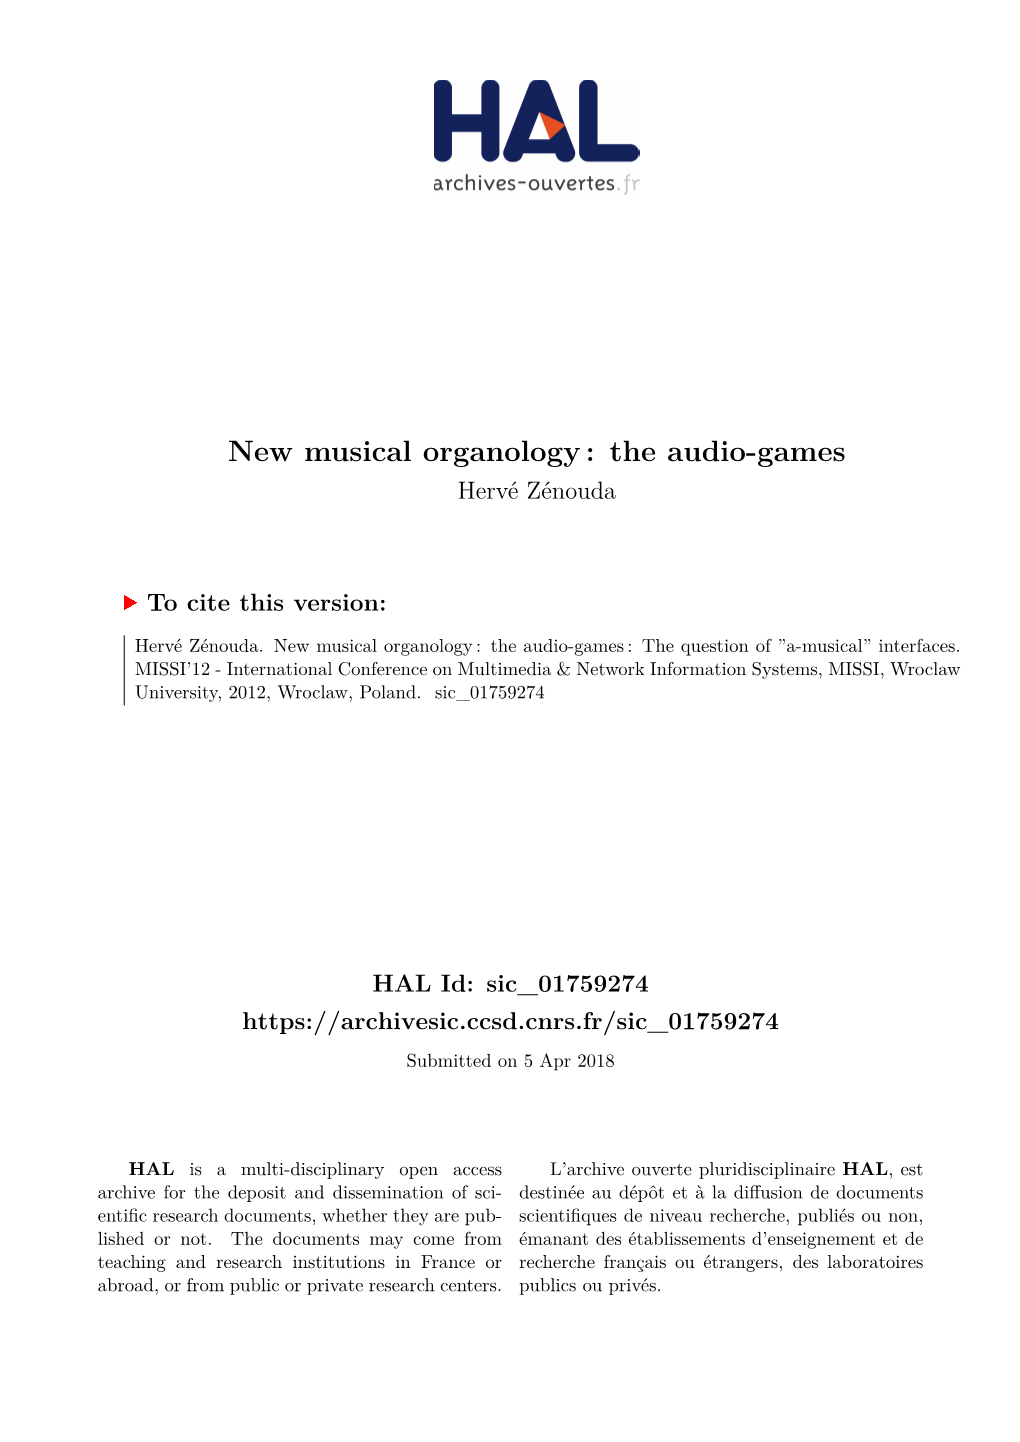 New Musical Organology: the Audio-Games